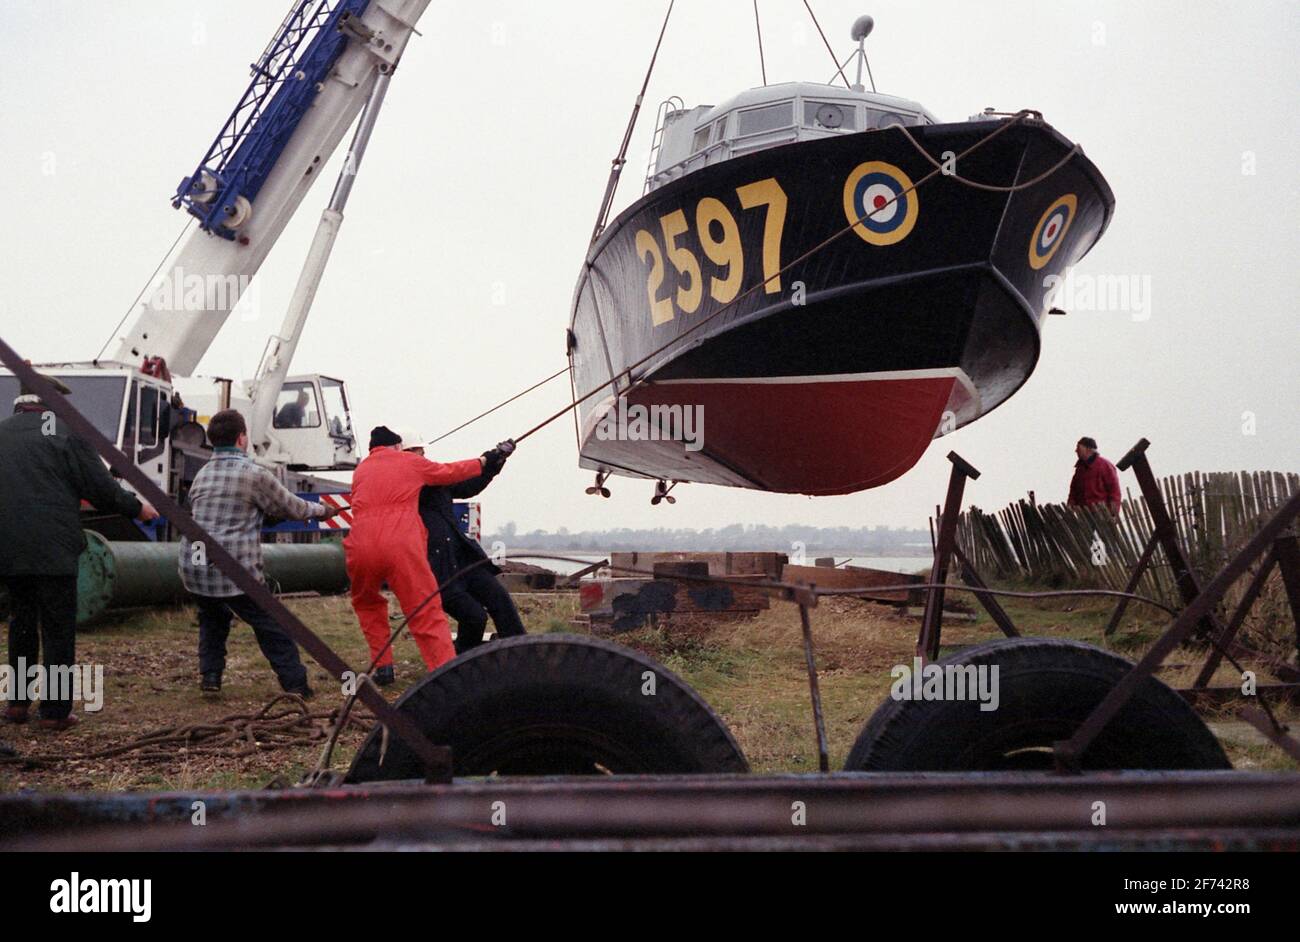 AJAXNETPHOTO. 7TH FEBRUARY, 1996. CALSHOT, ENGLAND. -ASR LIFT - AIR SEA RESCUE CRAFT 2597 BEING LIFTED INTO THE WATER AT CALSHOT SPIT AHEAD OF TOW TO THE HAMBLE RIVER AND A NEW MOORING.  PHOTO: JONATHAN EASTLAND/AJAX  REF:960702 26 Stock Photo